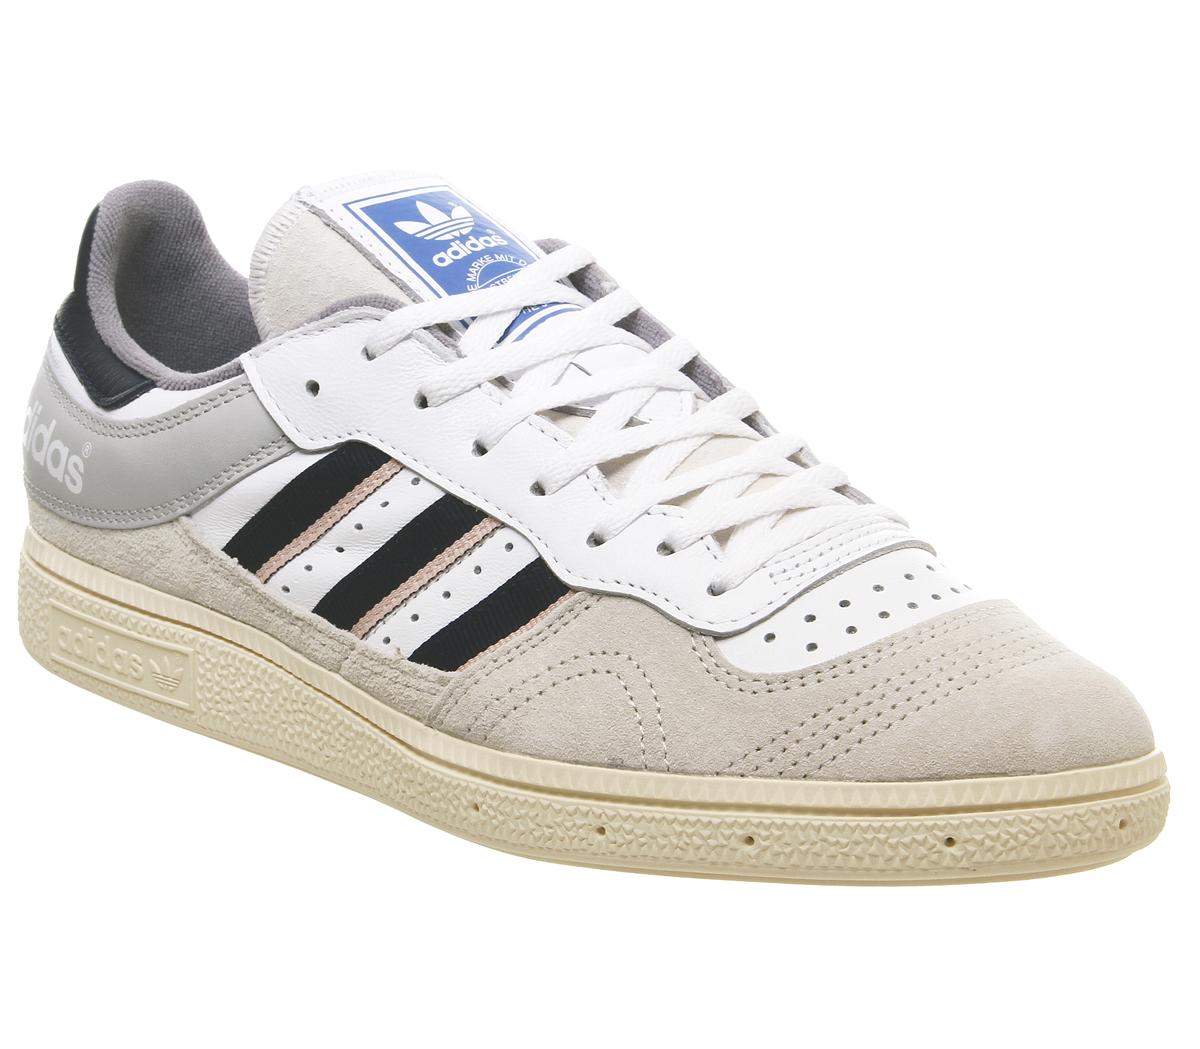 adidas Handball Top Trainers Raw White Collegiate Navy Vapour Pink - His  trainers